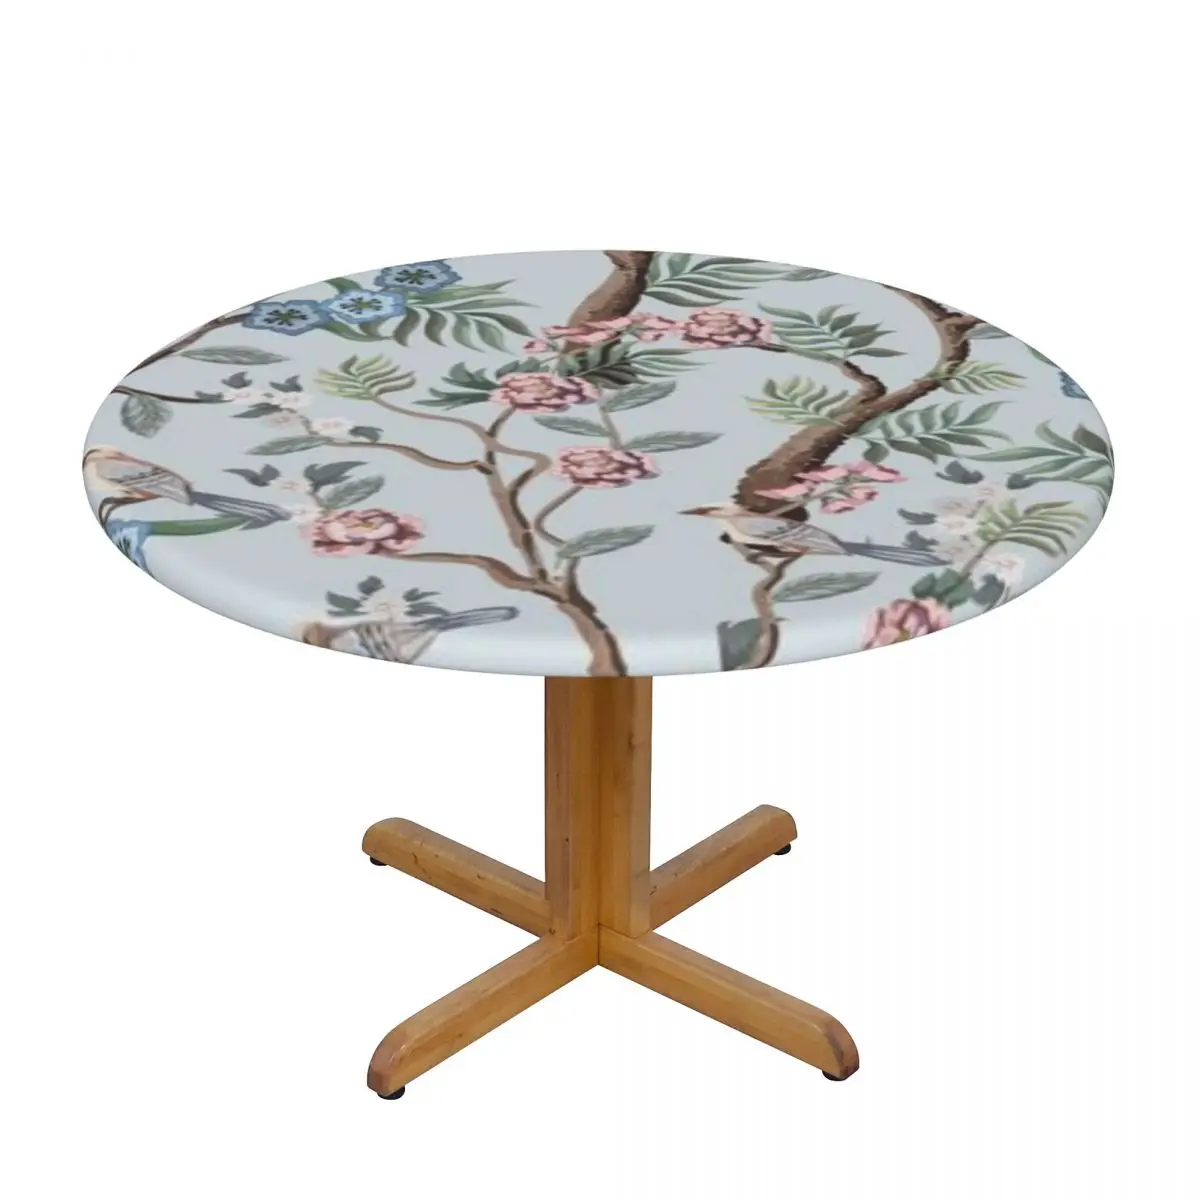 

Modern Round Table Cover Stretch Tablecloths Chinoiserie Style With Peonies Trees And Birds Home Decorative Table Cloth